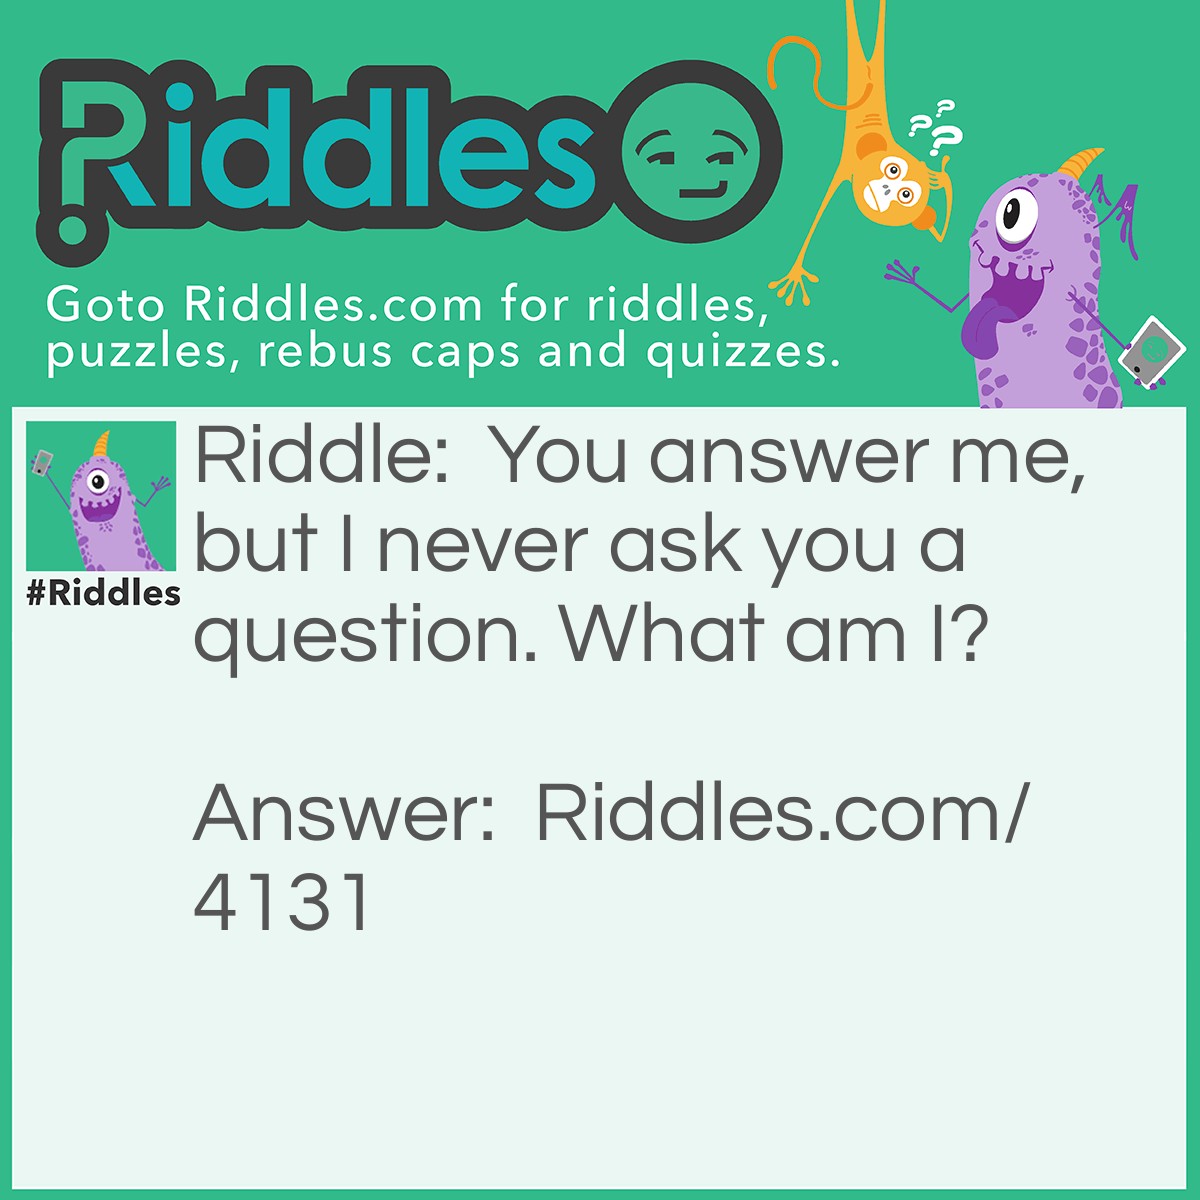 Riddle: You answer me, but I never ask you a question. What am I? Answer: A telephone.